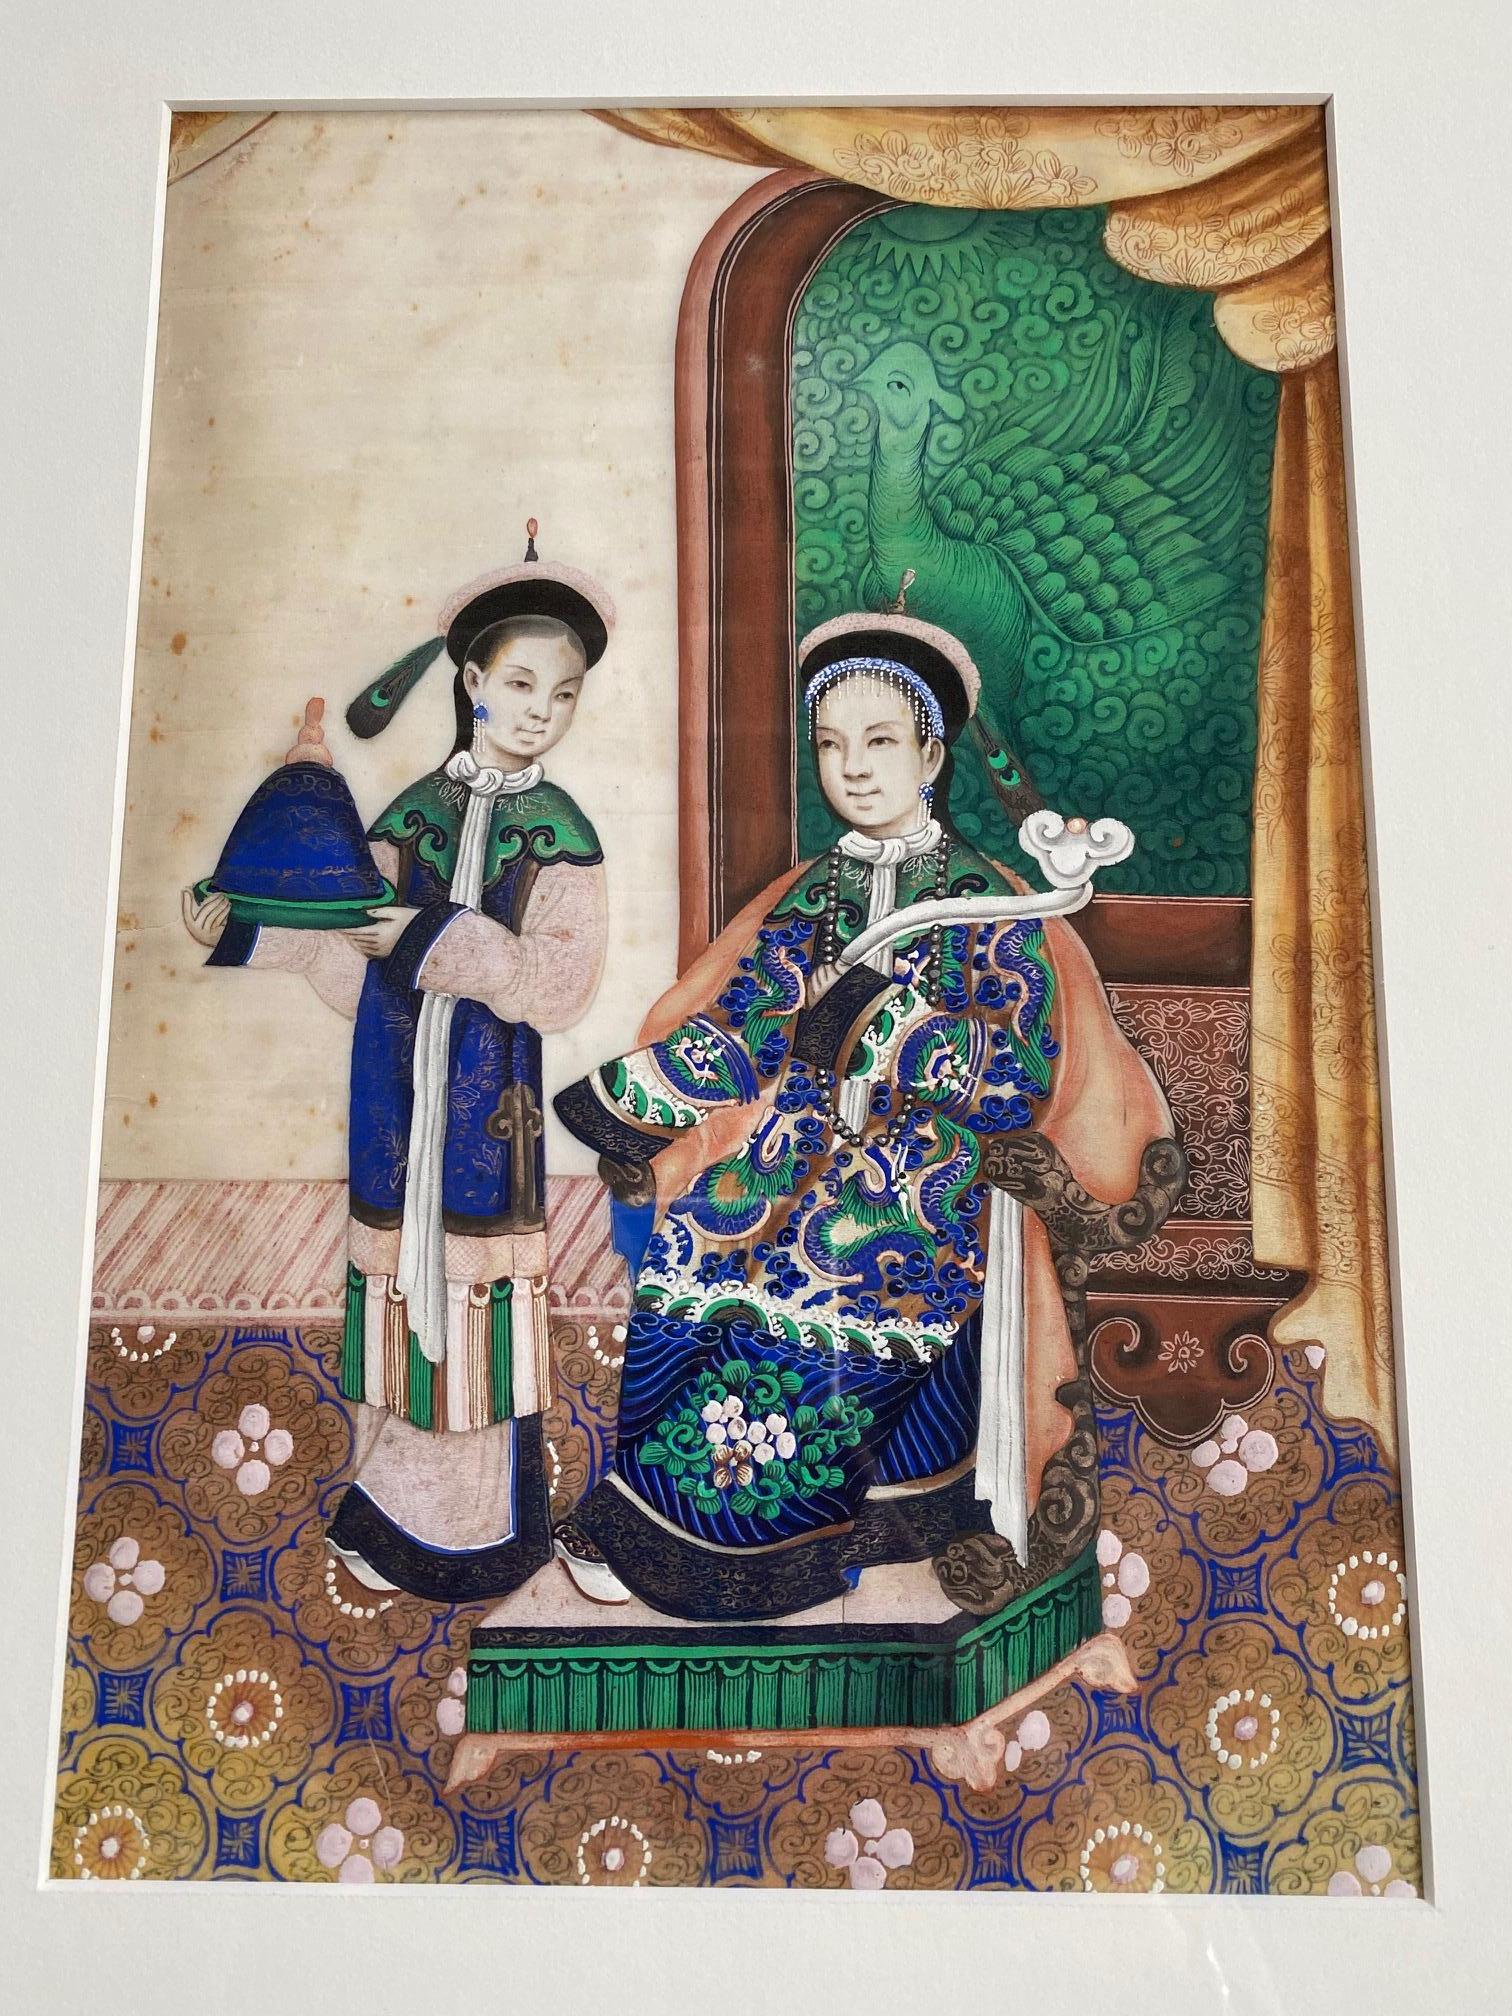 Early 19th century Chinese export pith painting of figures in an Interior, likely circa 1830s, having a very finely painted oil on pith paper view of an exquisitely robed Lady holding a Pipa (Chinese Lute) and her attendant holding what is probably